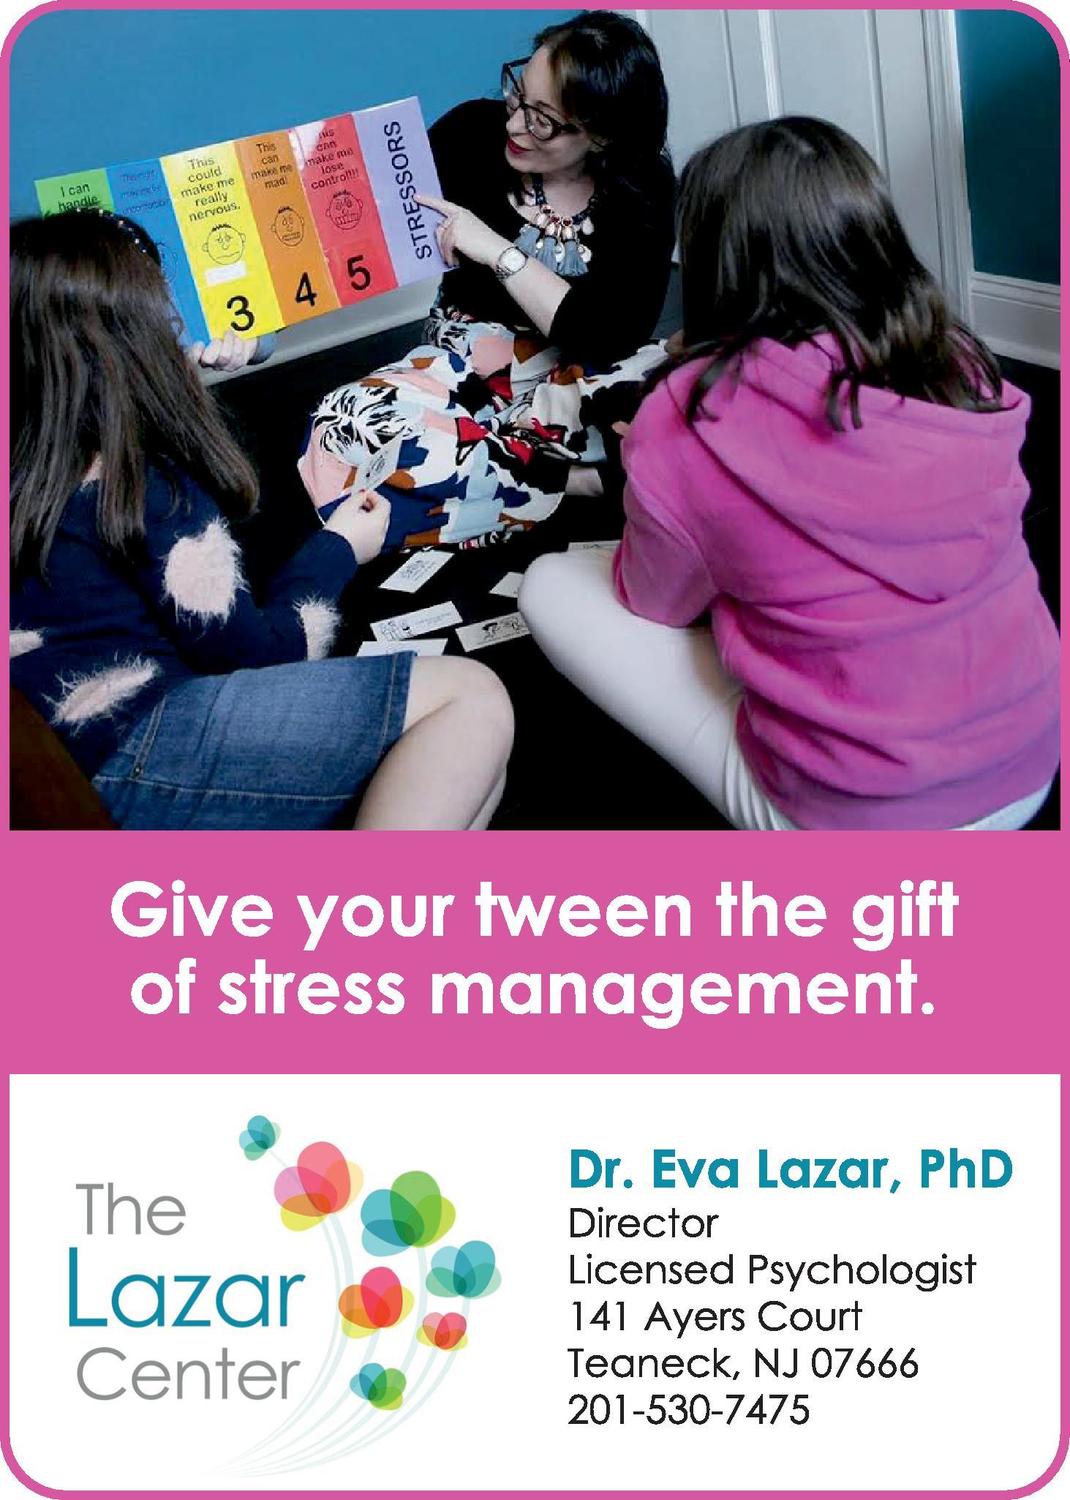 Gallery Photo of Like adults, tweens struggle with stress. Tweens can learn to manage stress through problem-solving strategies and effective time management skills.